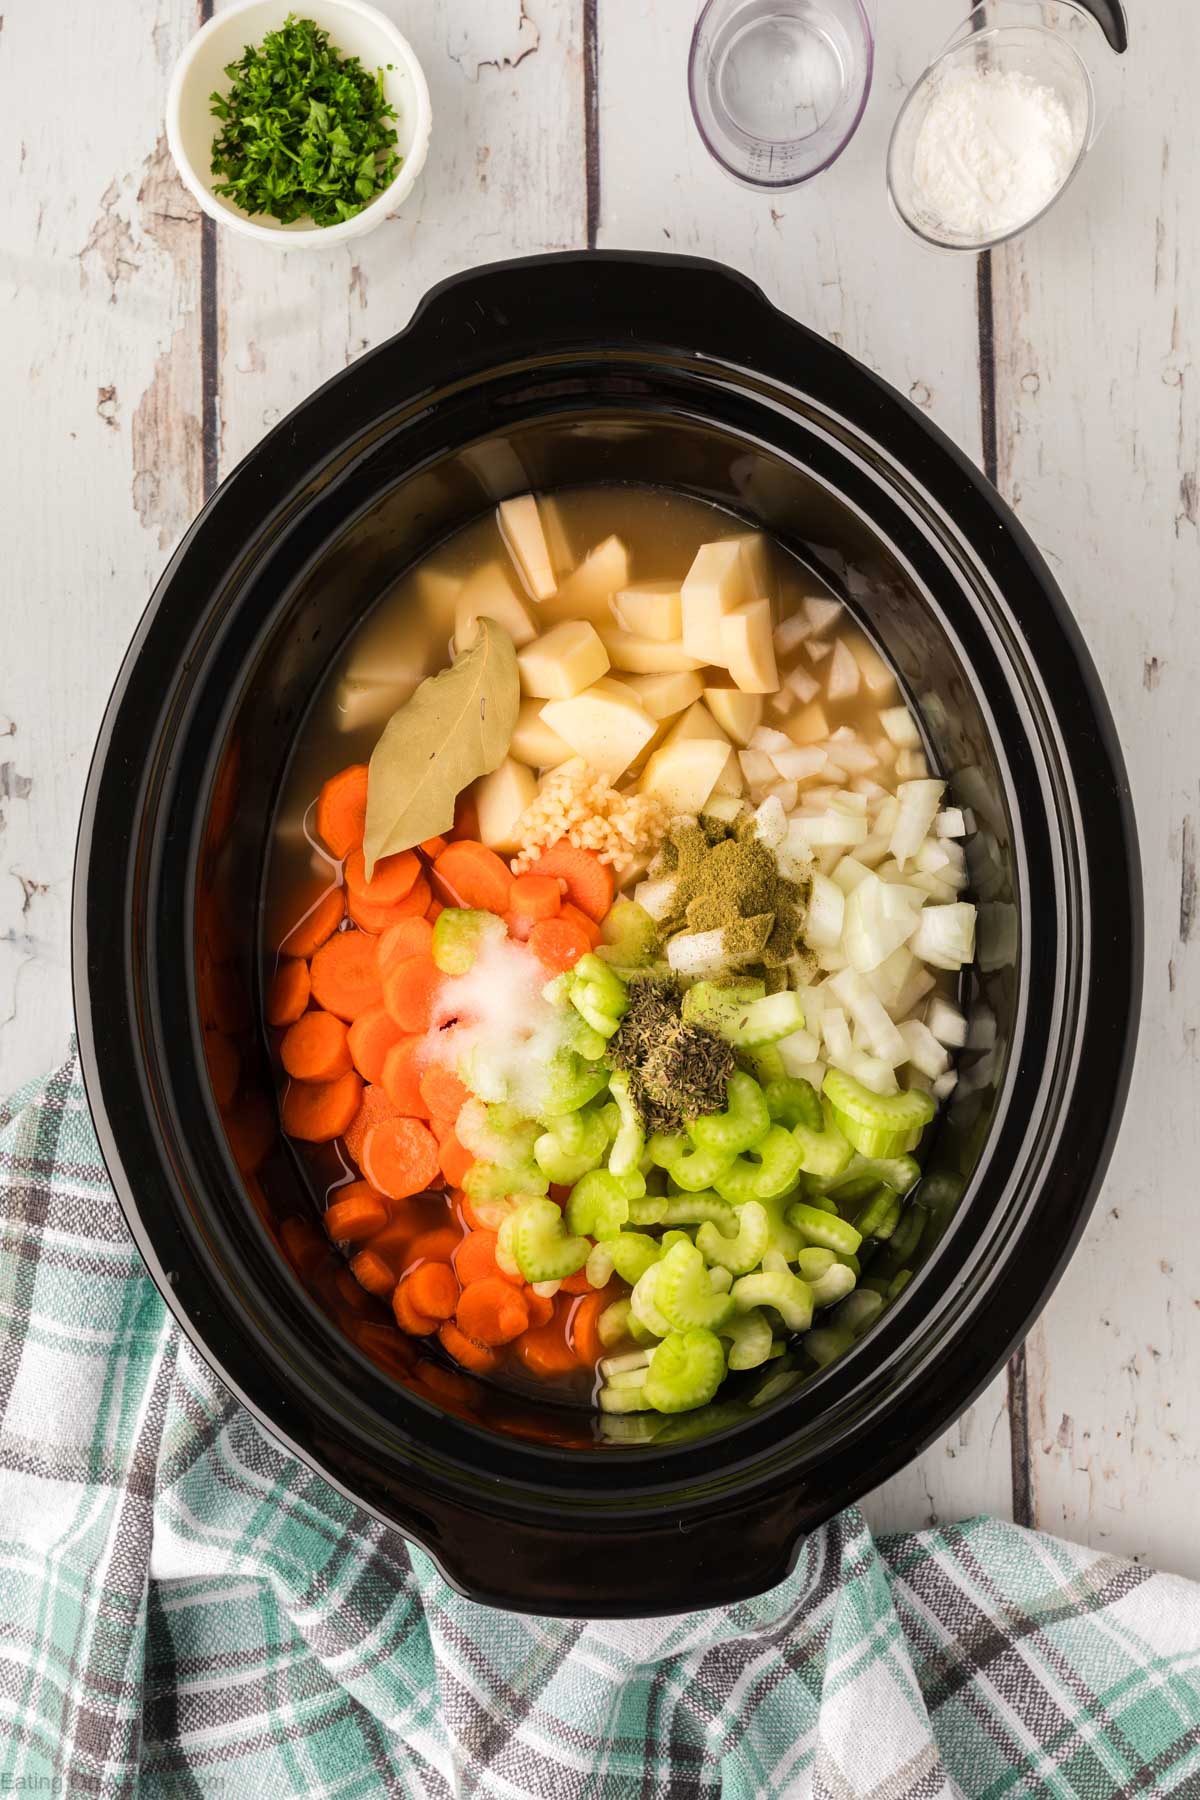 Placing the ingredients in the slow cooker